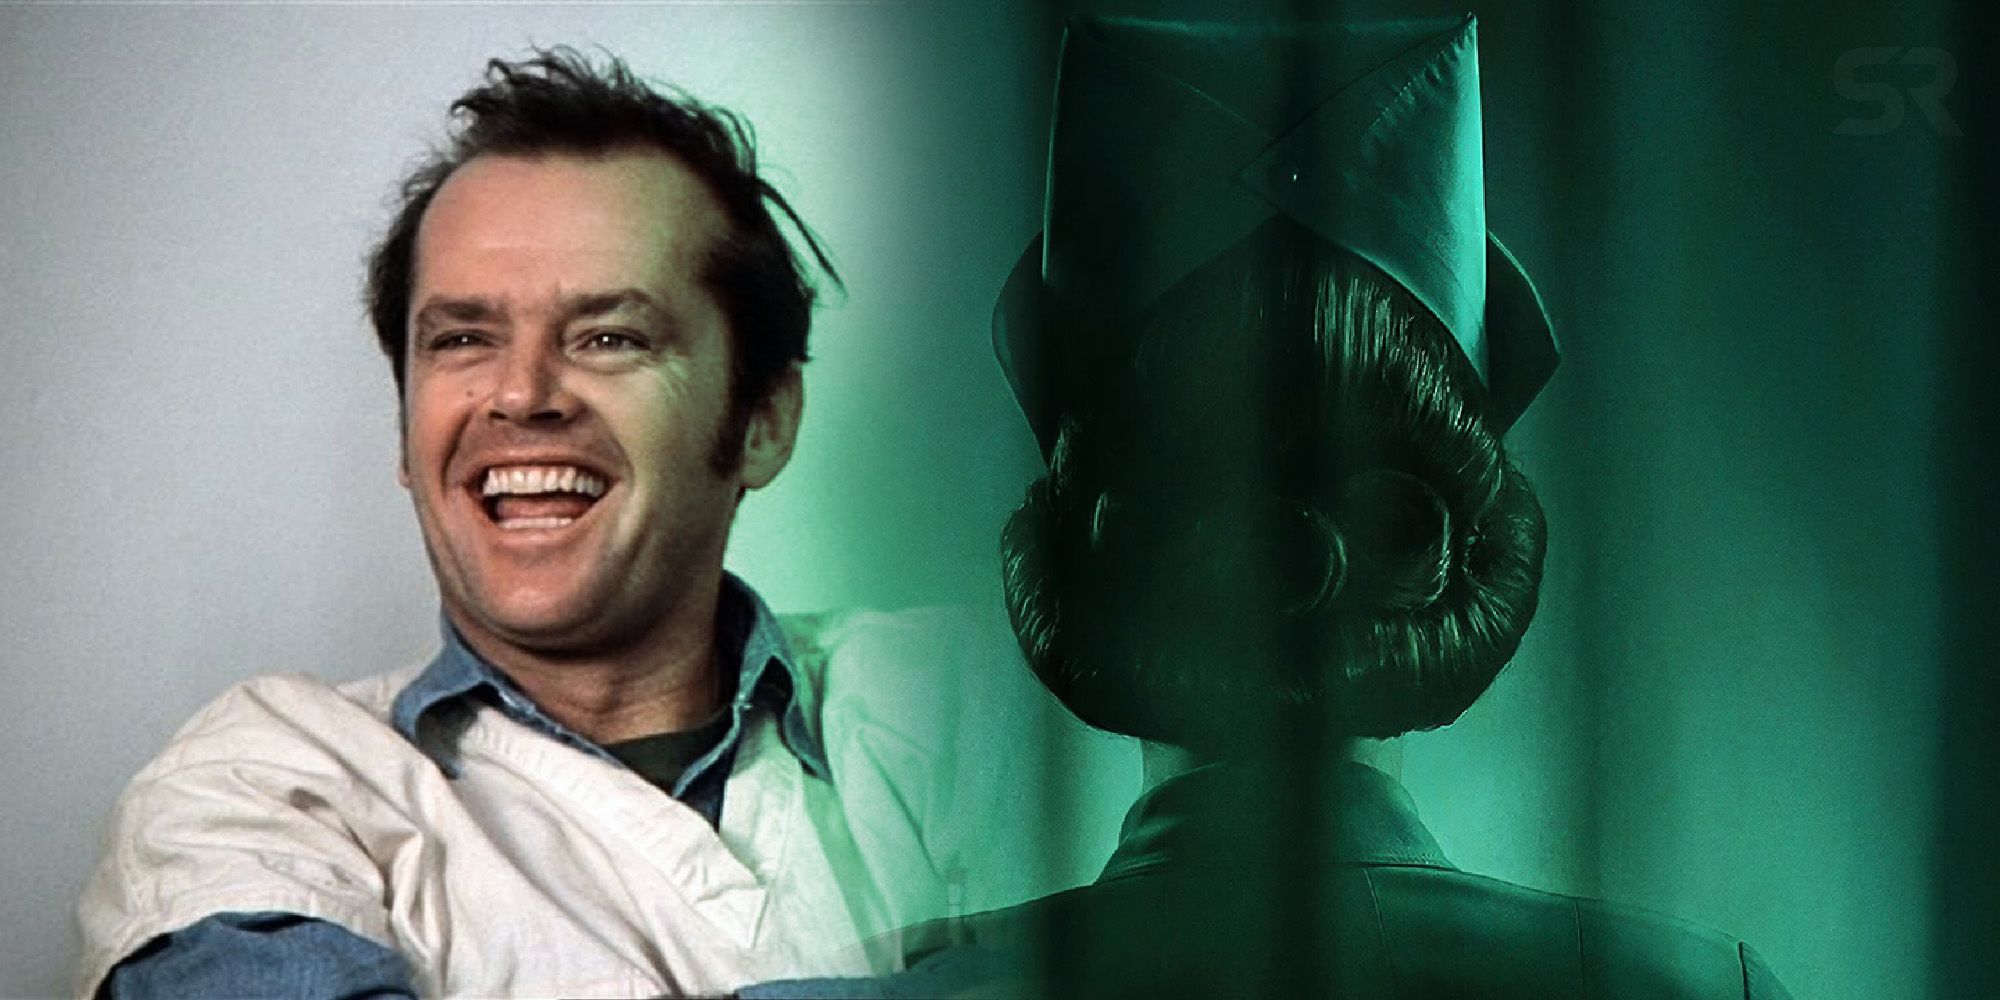 One Flew Over The Cuckoo's Nest Movie vs. Ratched: Which Version Is Better?